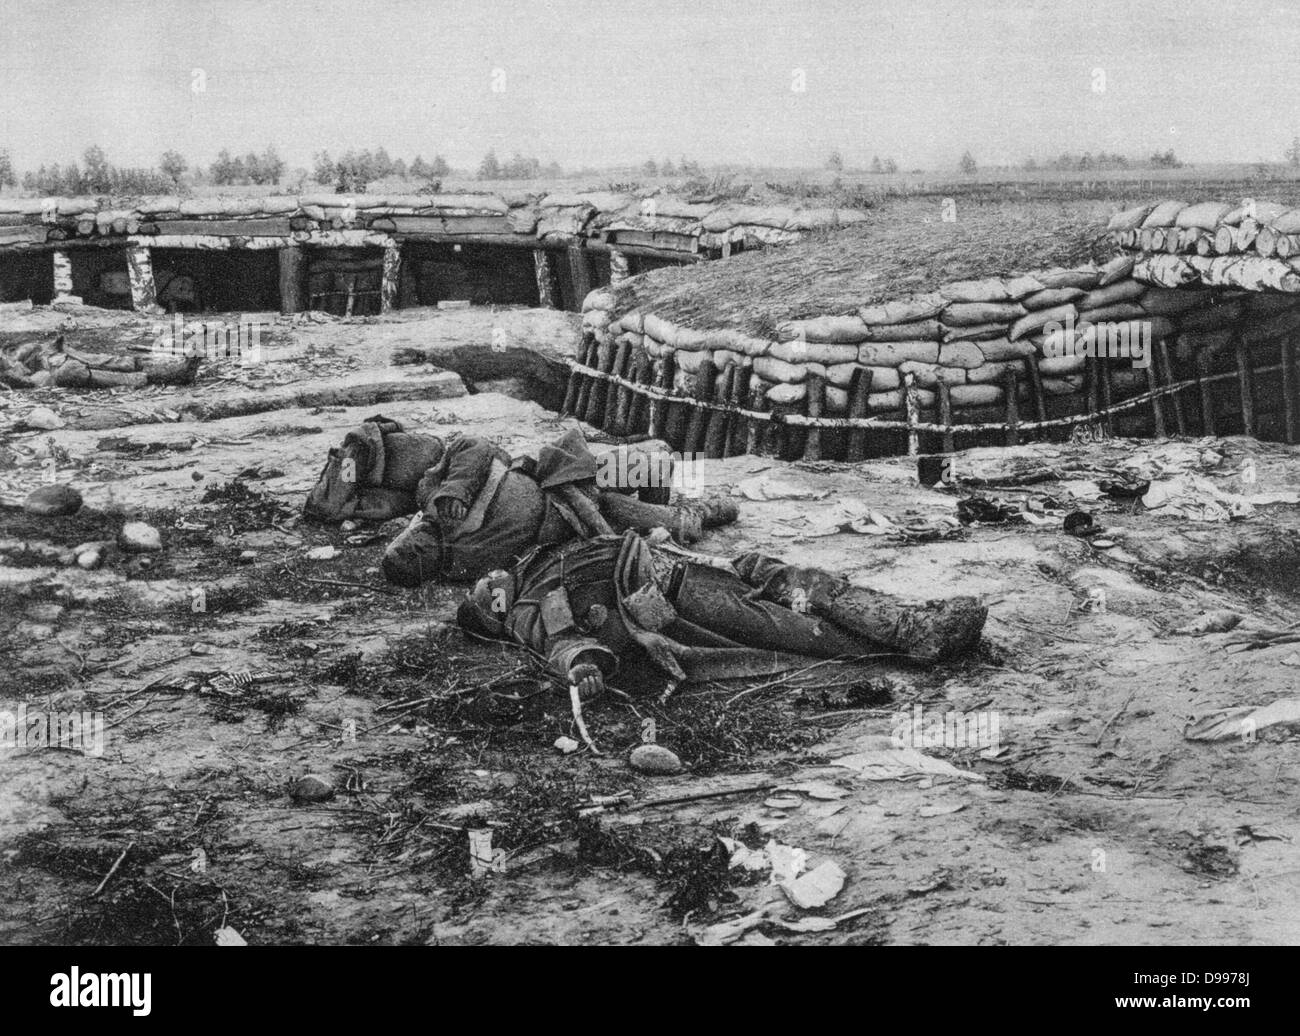 World War I 1914-1918: Eastern Front. Russian position abandoned in the face of German advance through Poland, 20 July/ 2 August) 1915. Battlefield Trench Soldier Dead Body Stock Photo